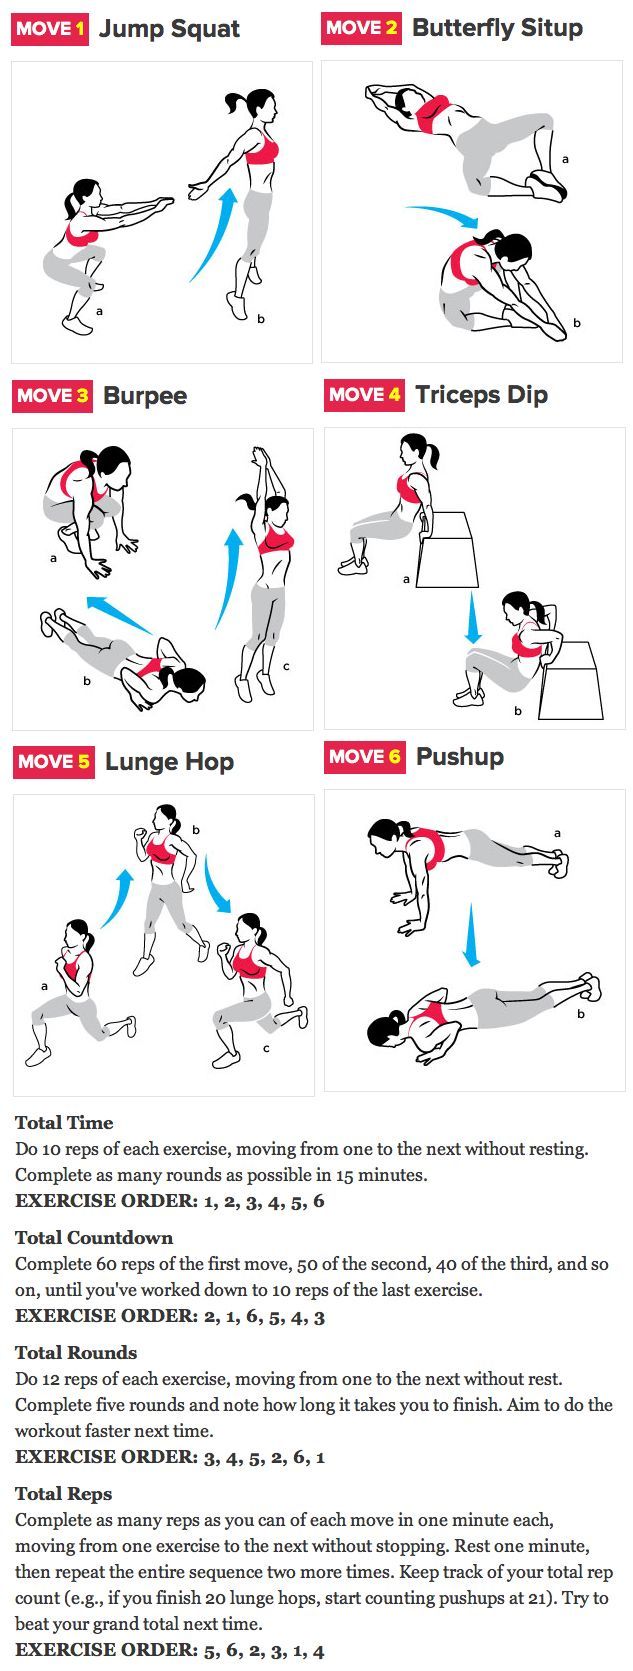 Crossfit exercises to do anywhere a